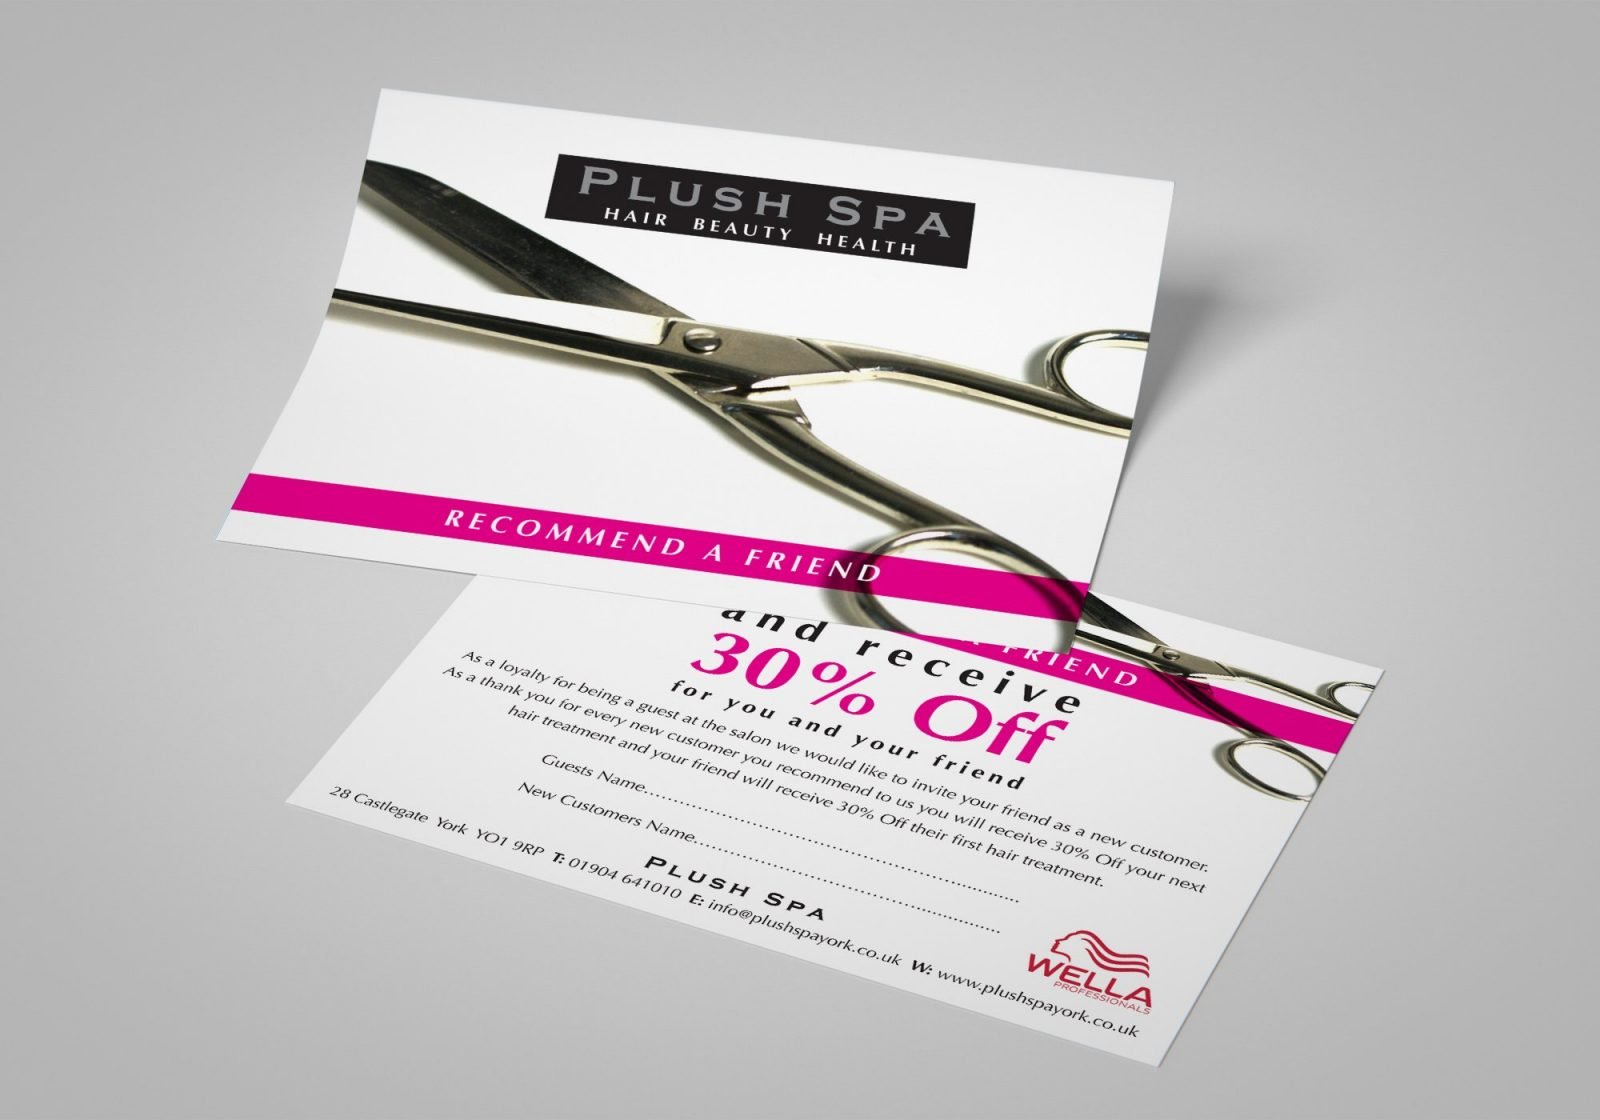 Front and back of a voucher for Push Spa Hair dressers